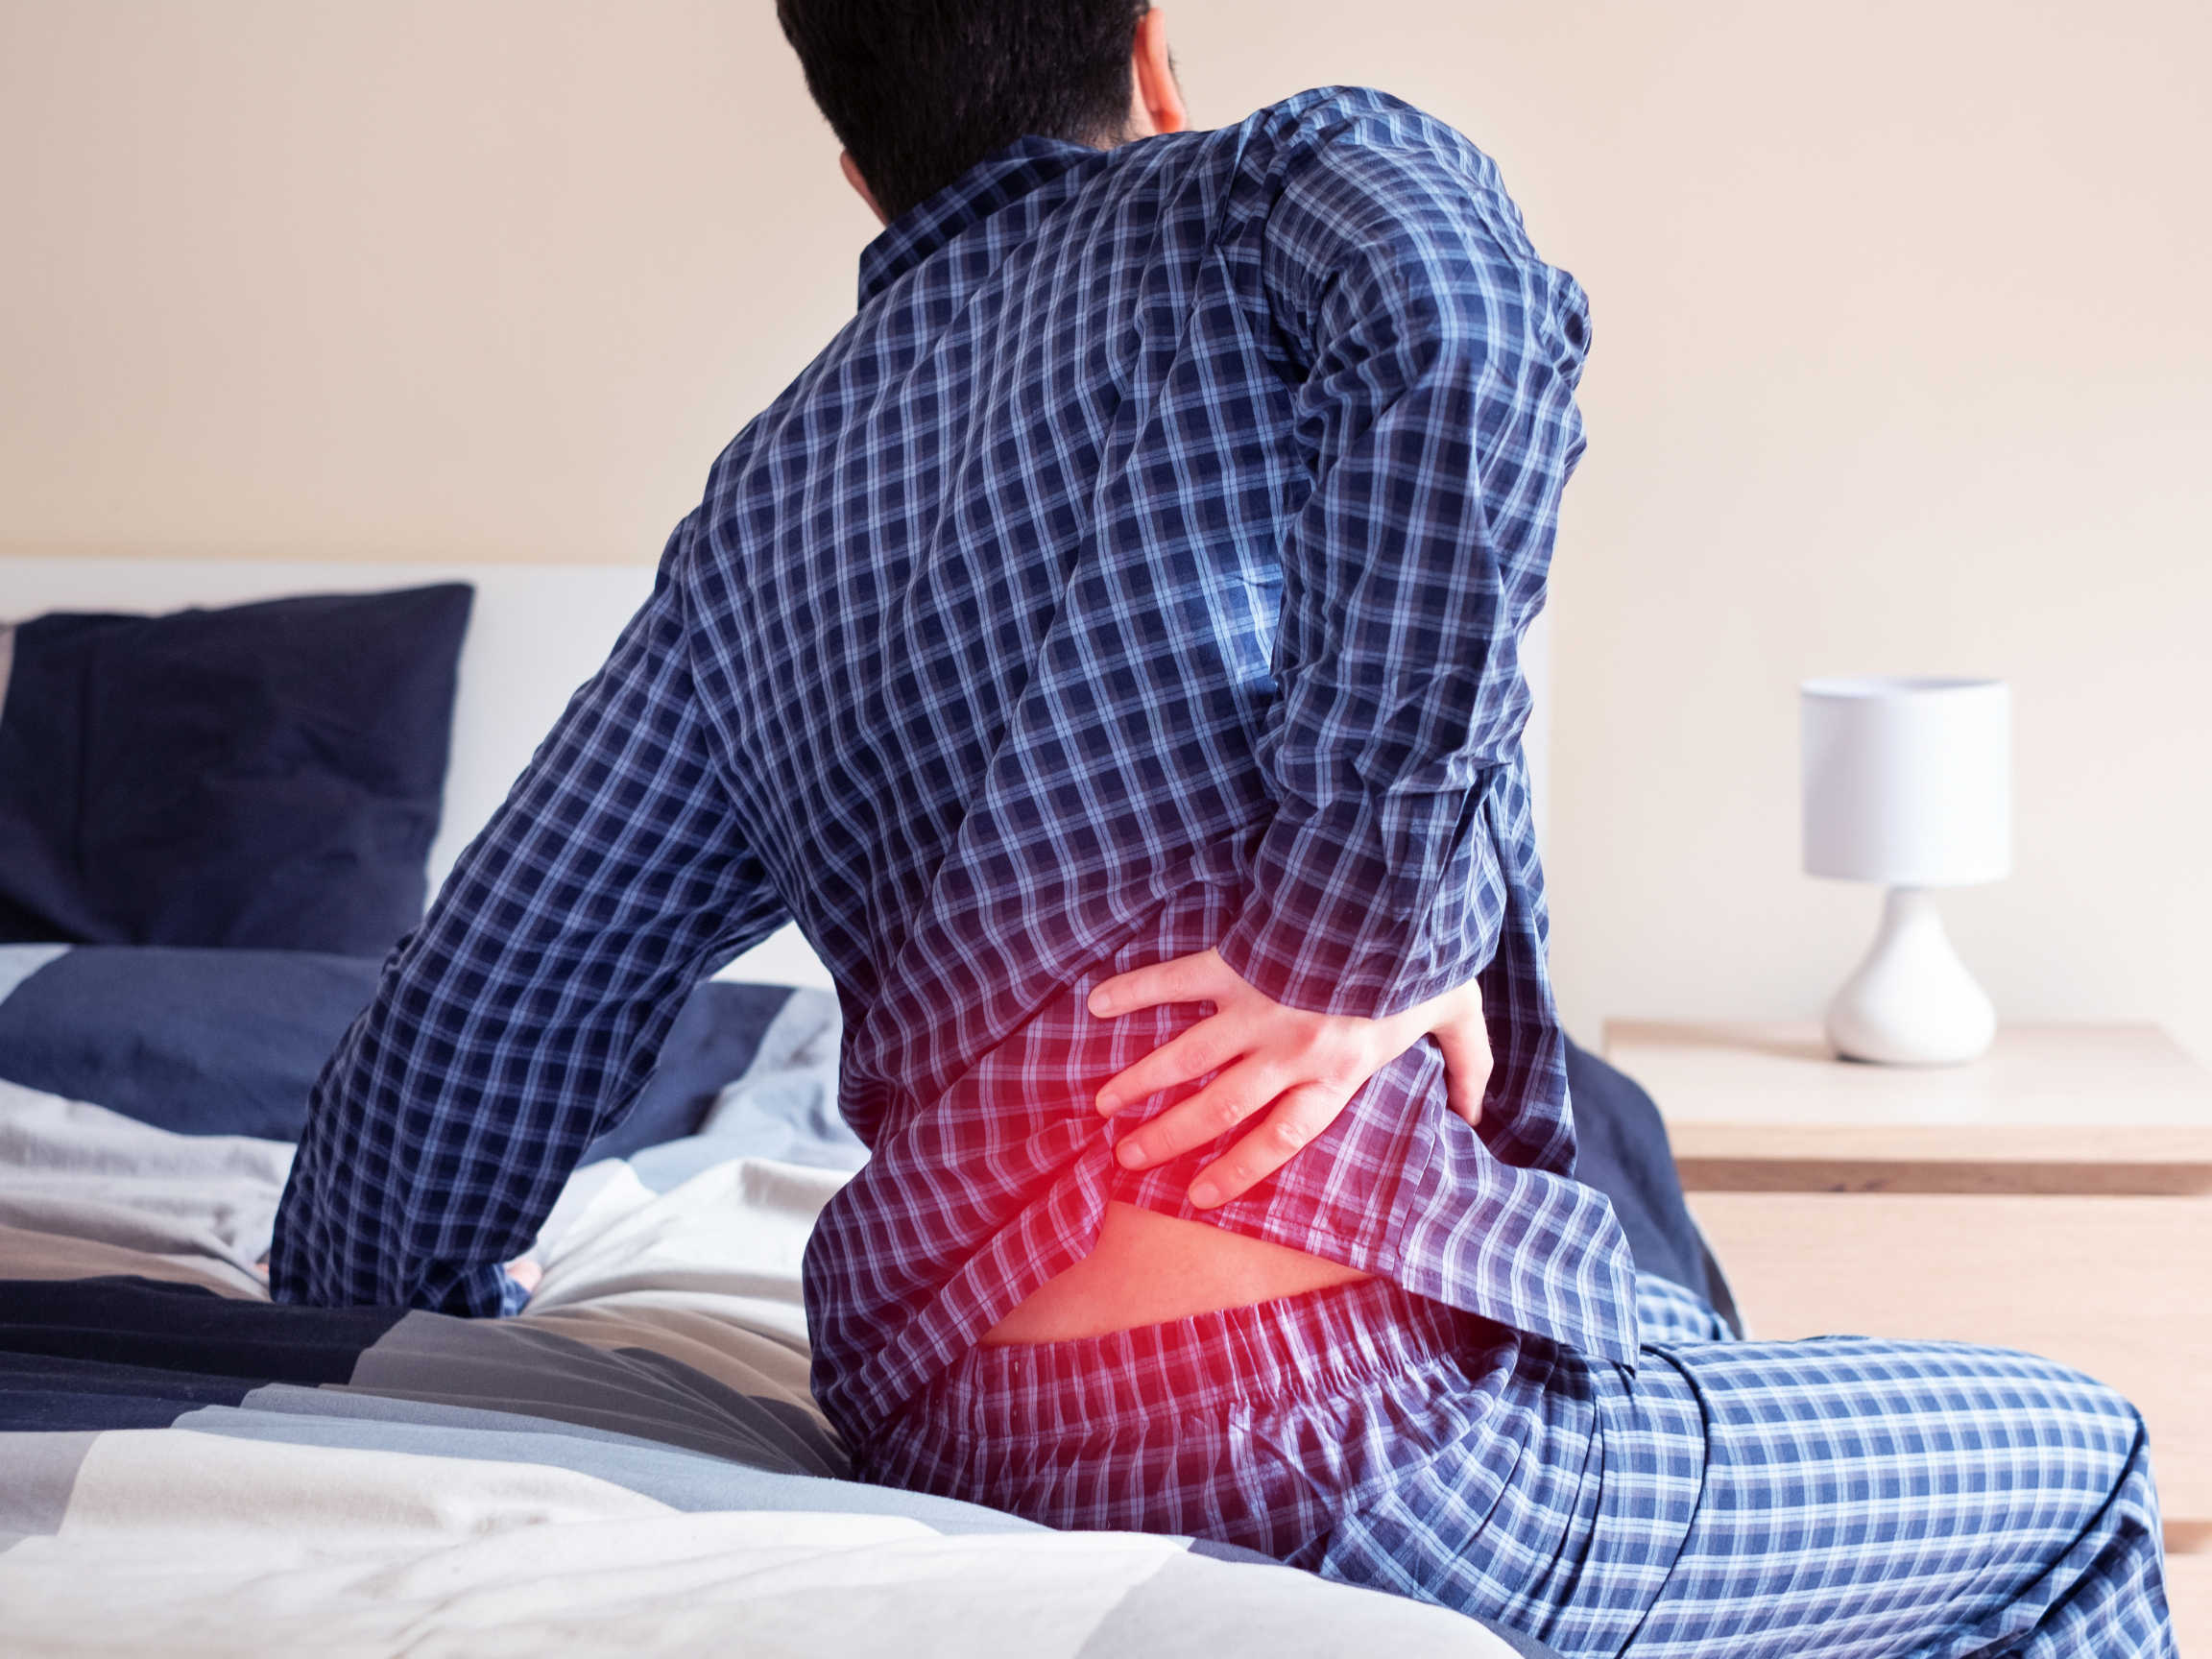 Ankylosing Spondylitis can be misdiagnosed for years. Learn the facts about this inflammatory back pain condition.